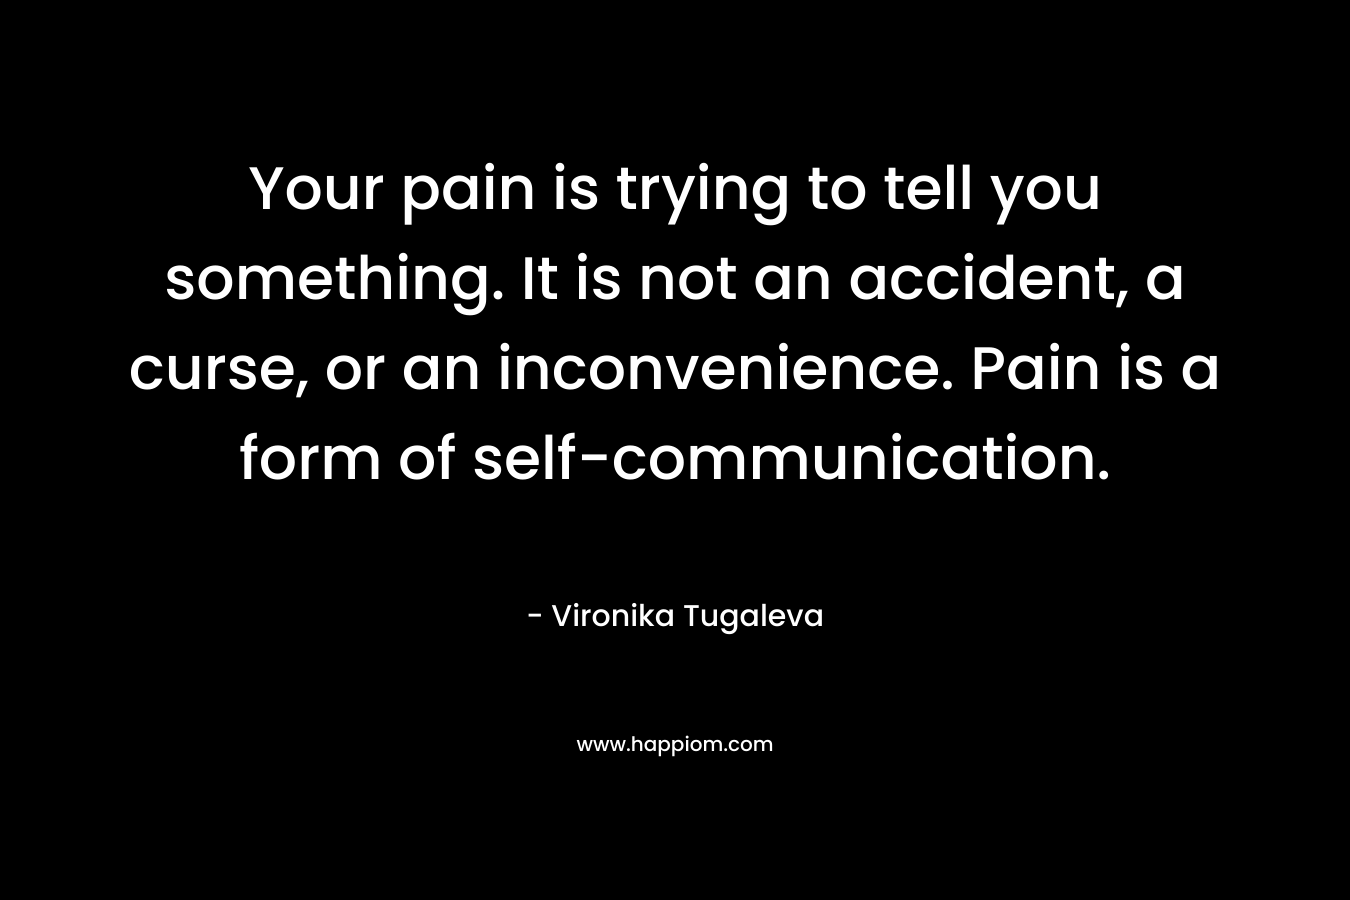 Your pain is trying to tell you something. It is not an accident, a curse, or an inconvenience. Pain is a form of self-communication. – Vironika Tugaleva